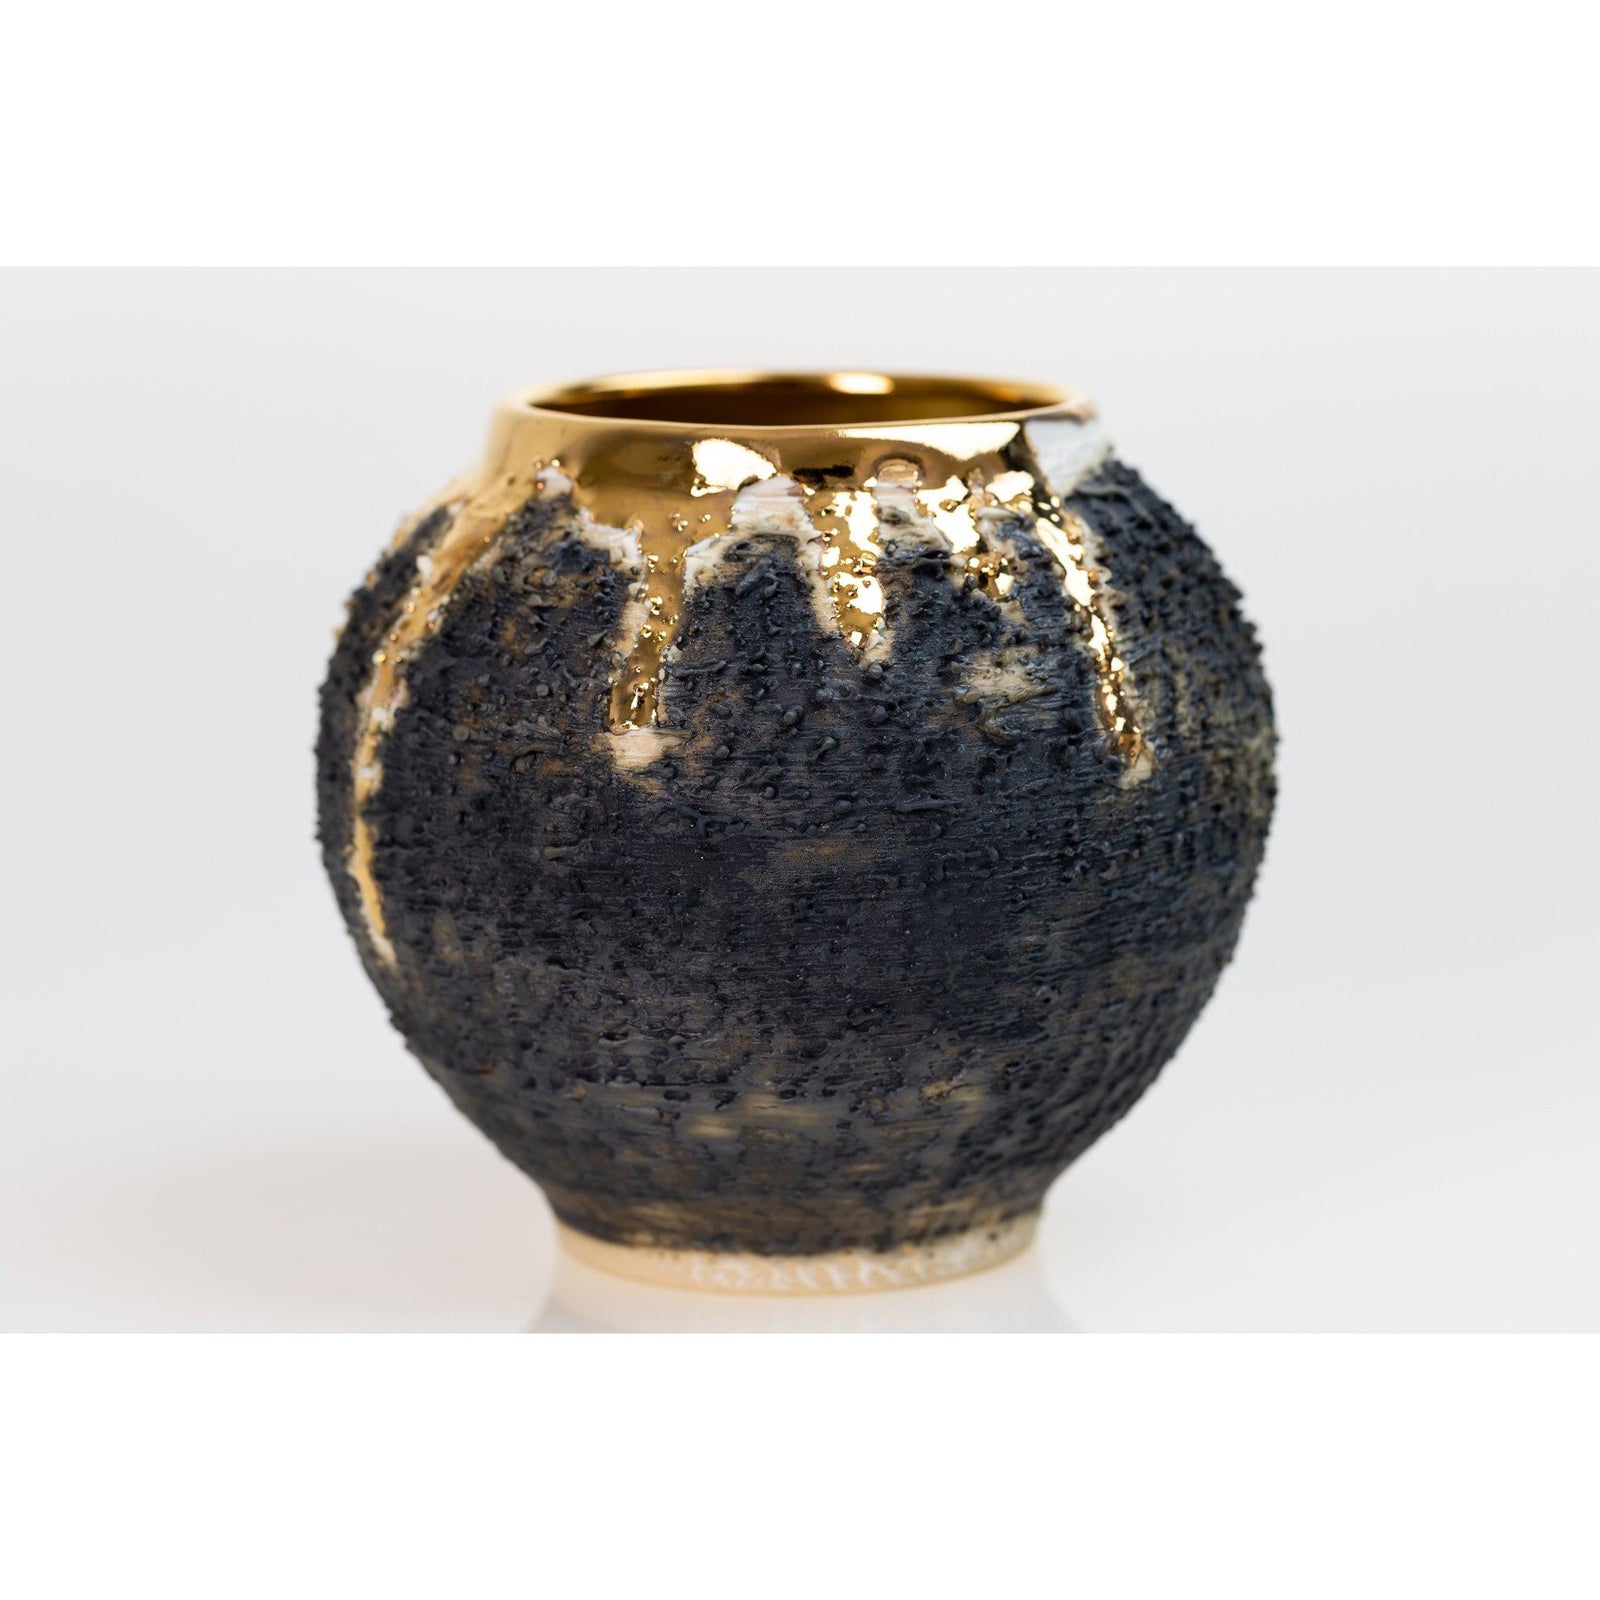 PGX27 Textured Moon Jar with Gold Lustre by Alex McCarthy, available at Padstow Gallery, Cornwall